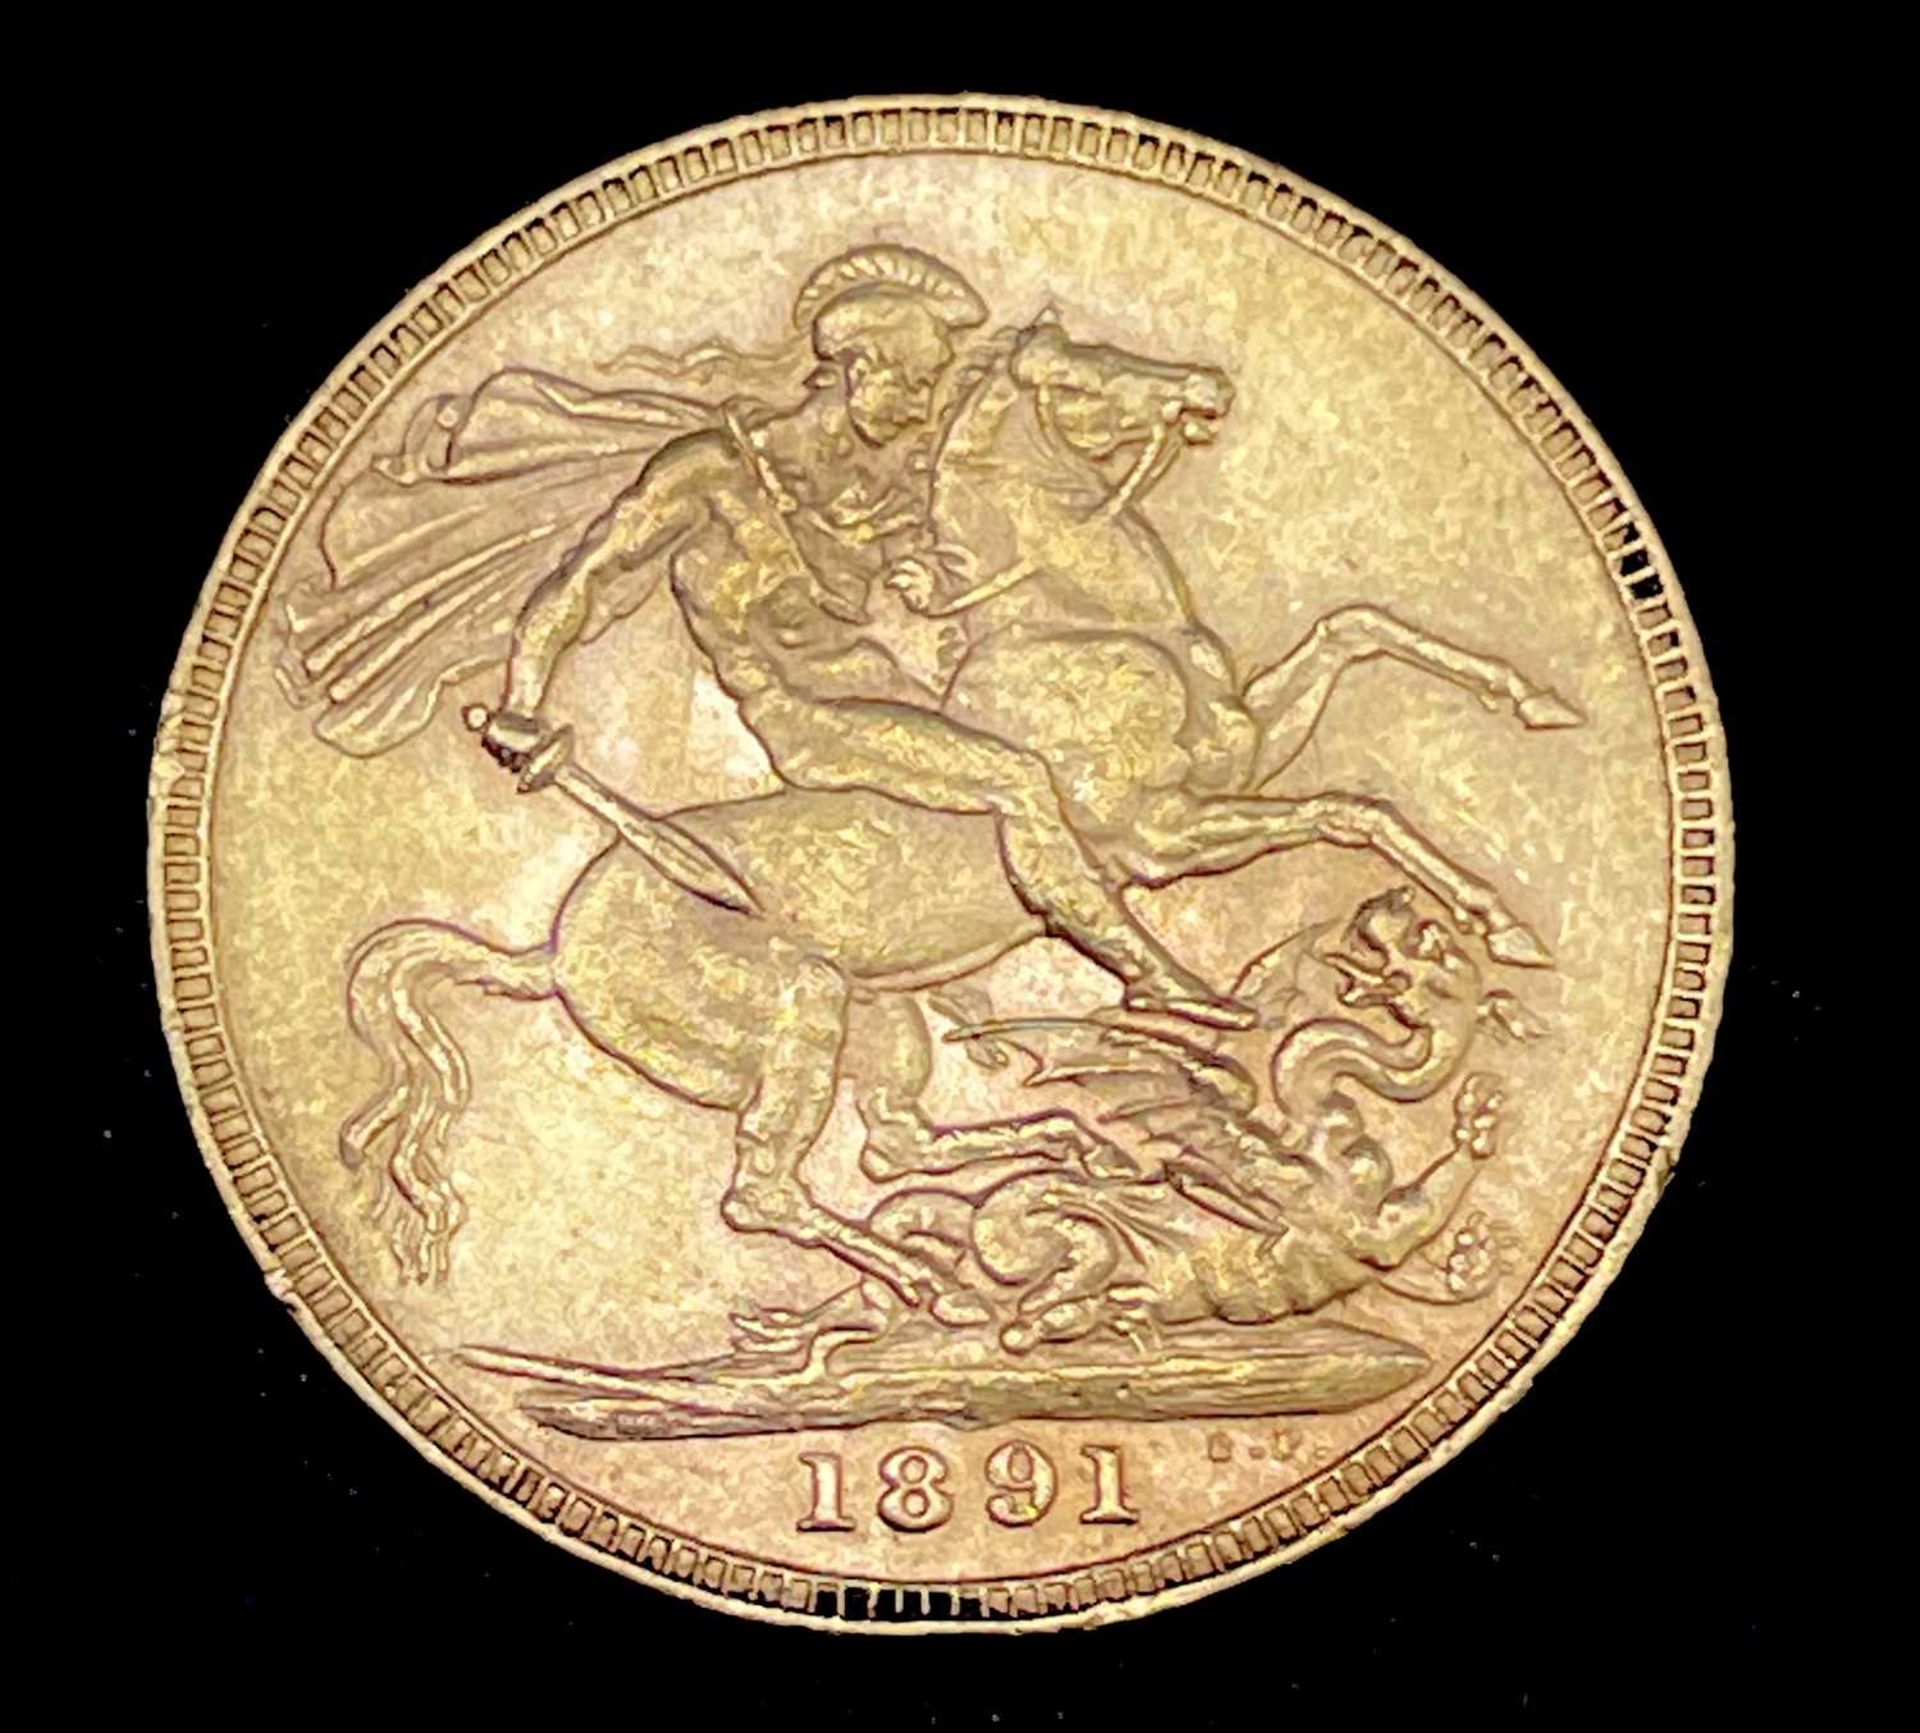 Great Britain Gold Sovereign 1891 EF Jubilee Head Condition: please request a condition report if